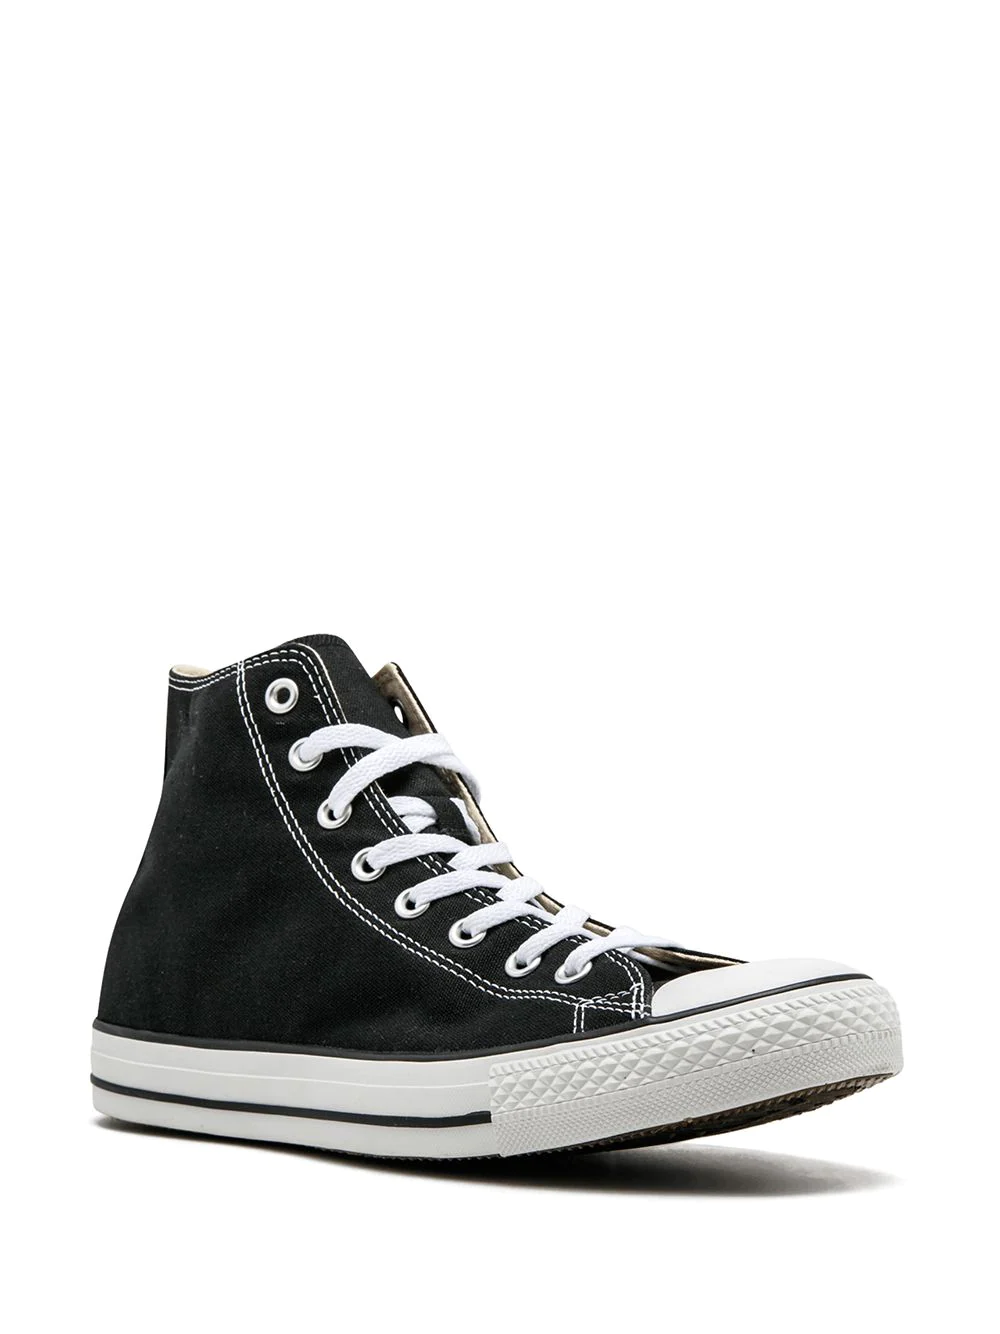 Converse Chuck Taylor All Star Black - The Trendy